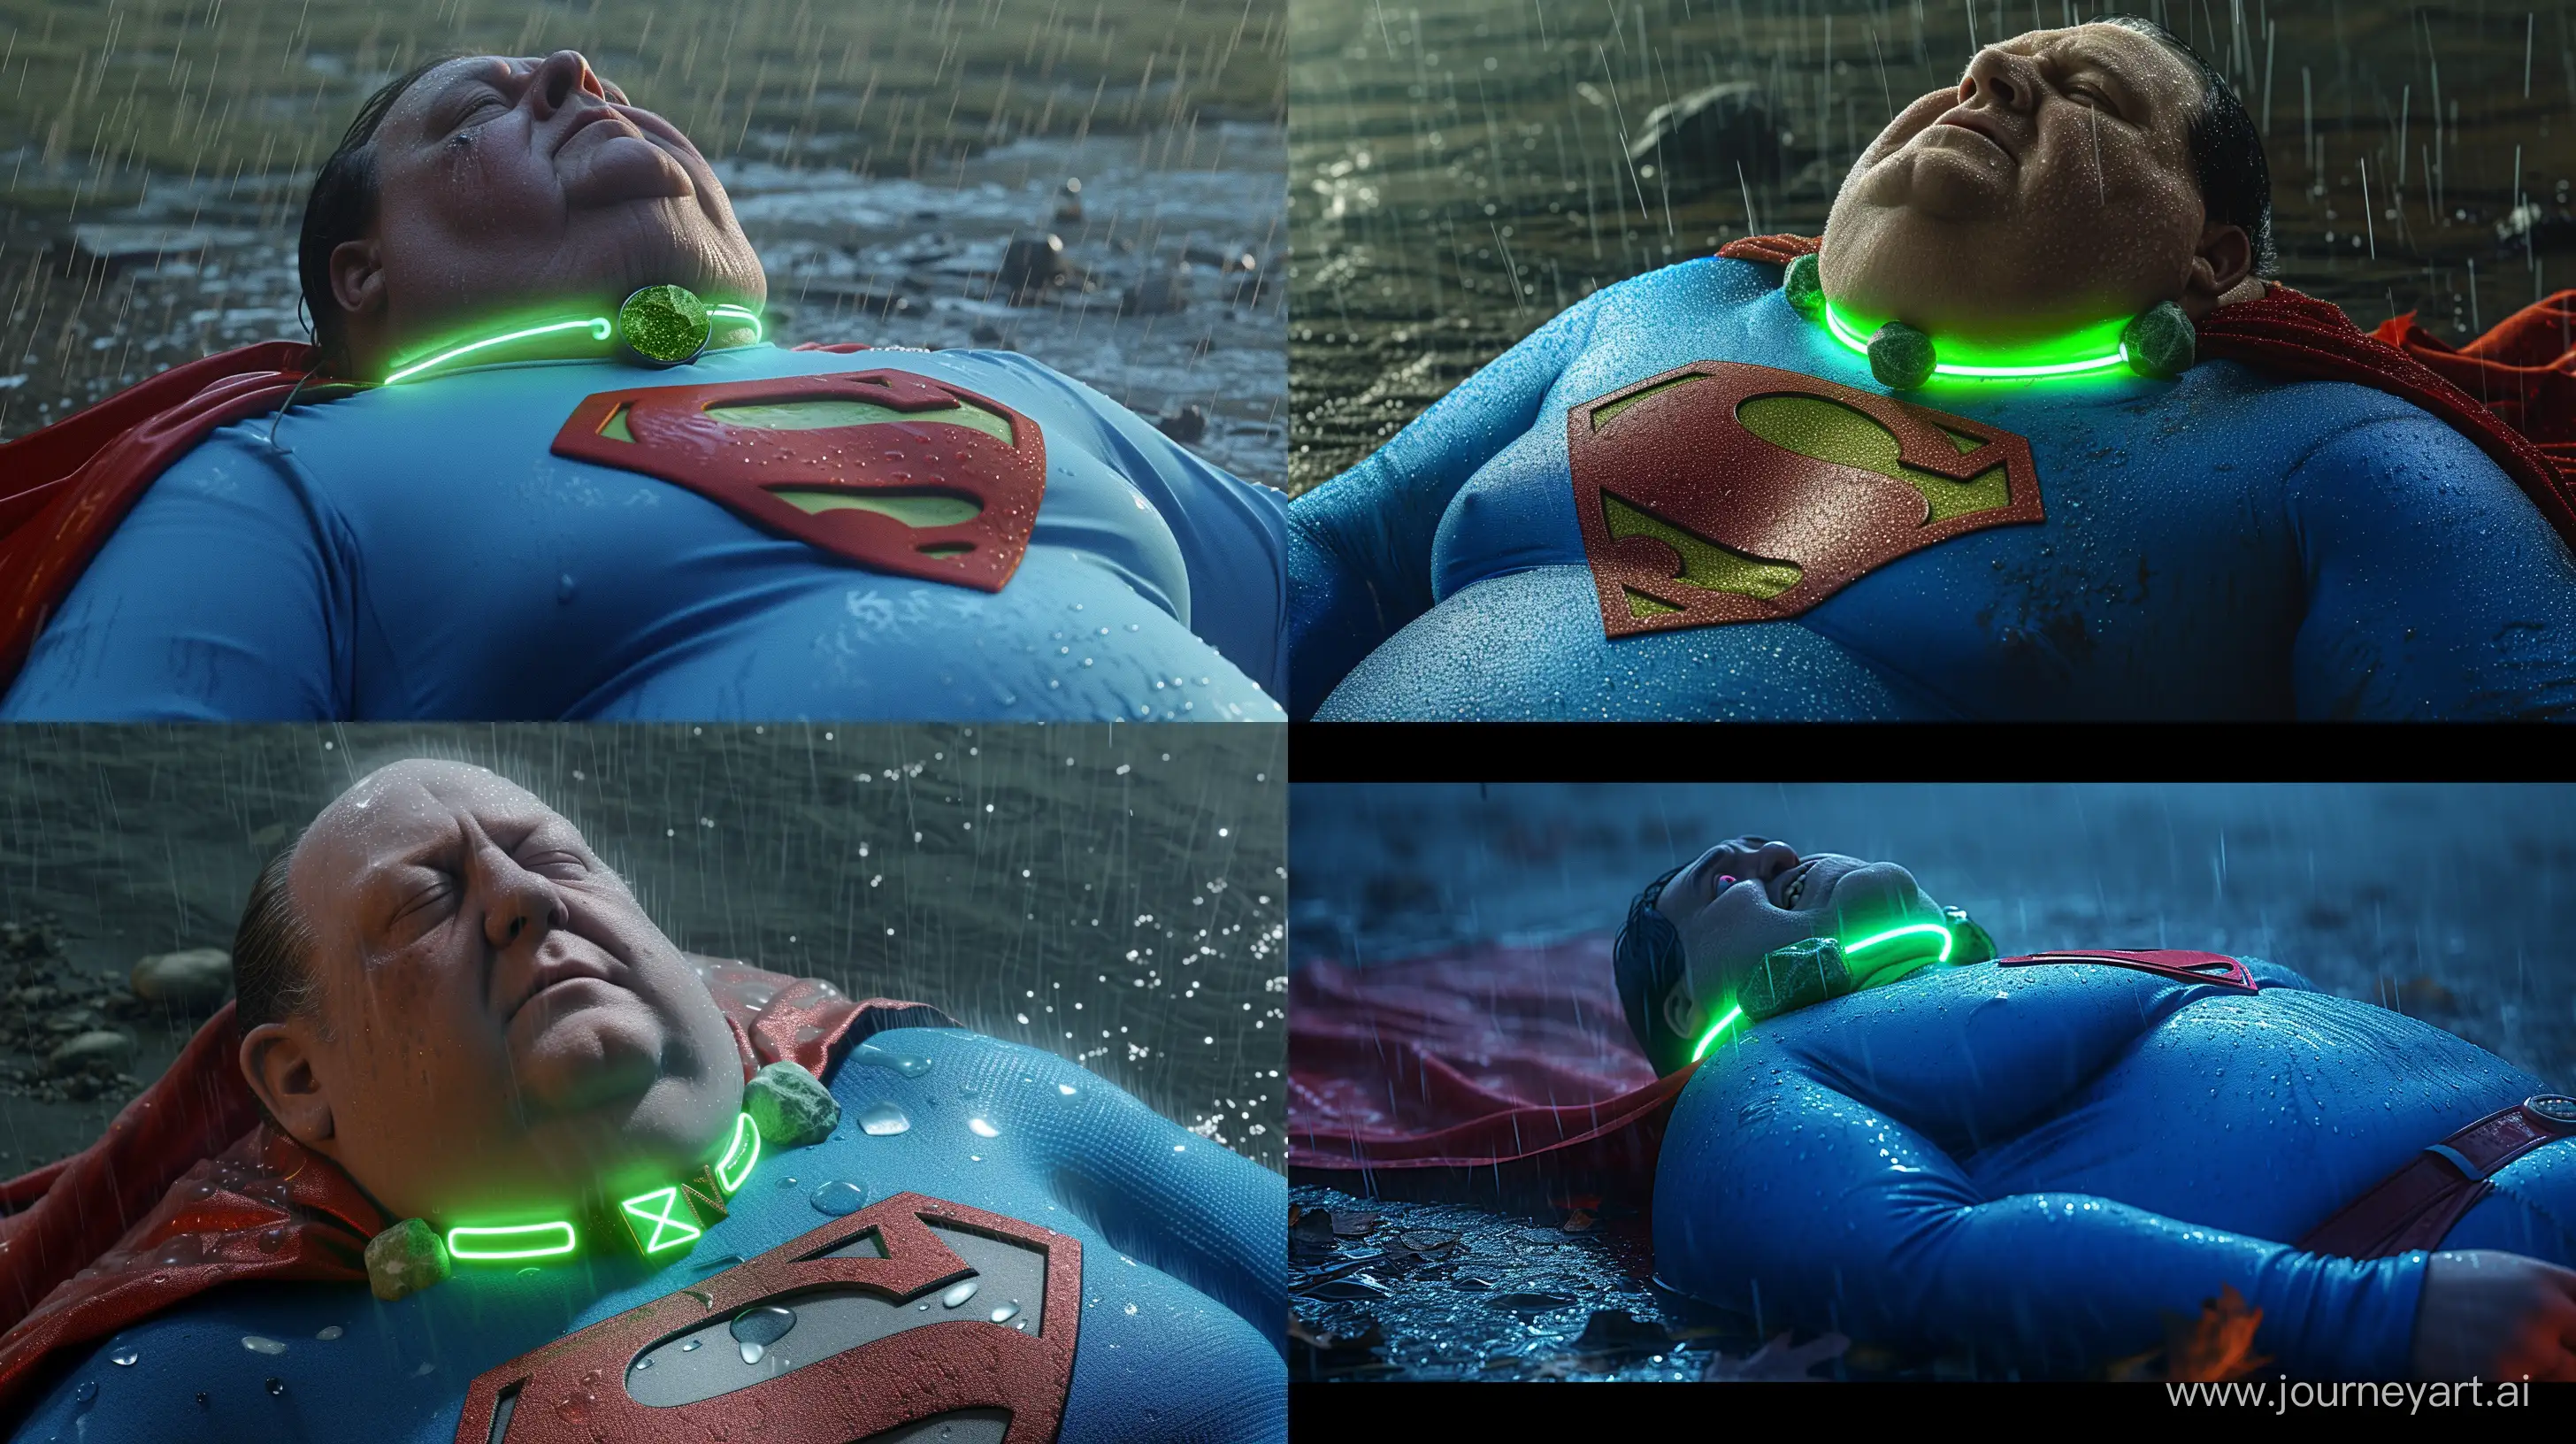 Elderly-Superman-Enjoys-Rainy-River-Day-with-Glowing-Green-Accents